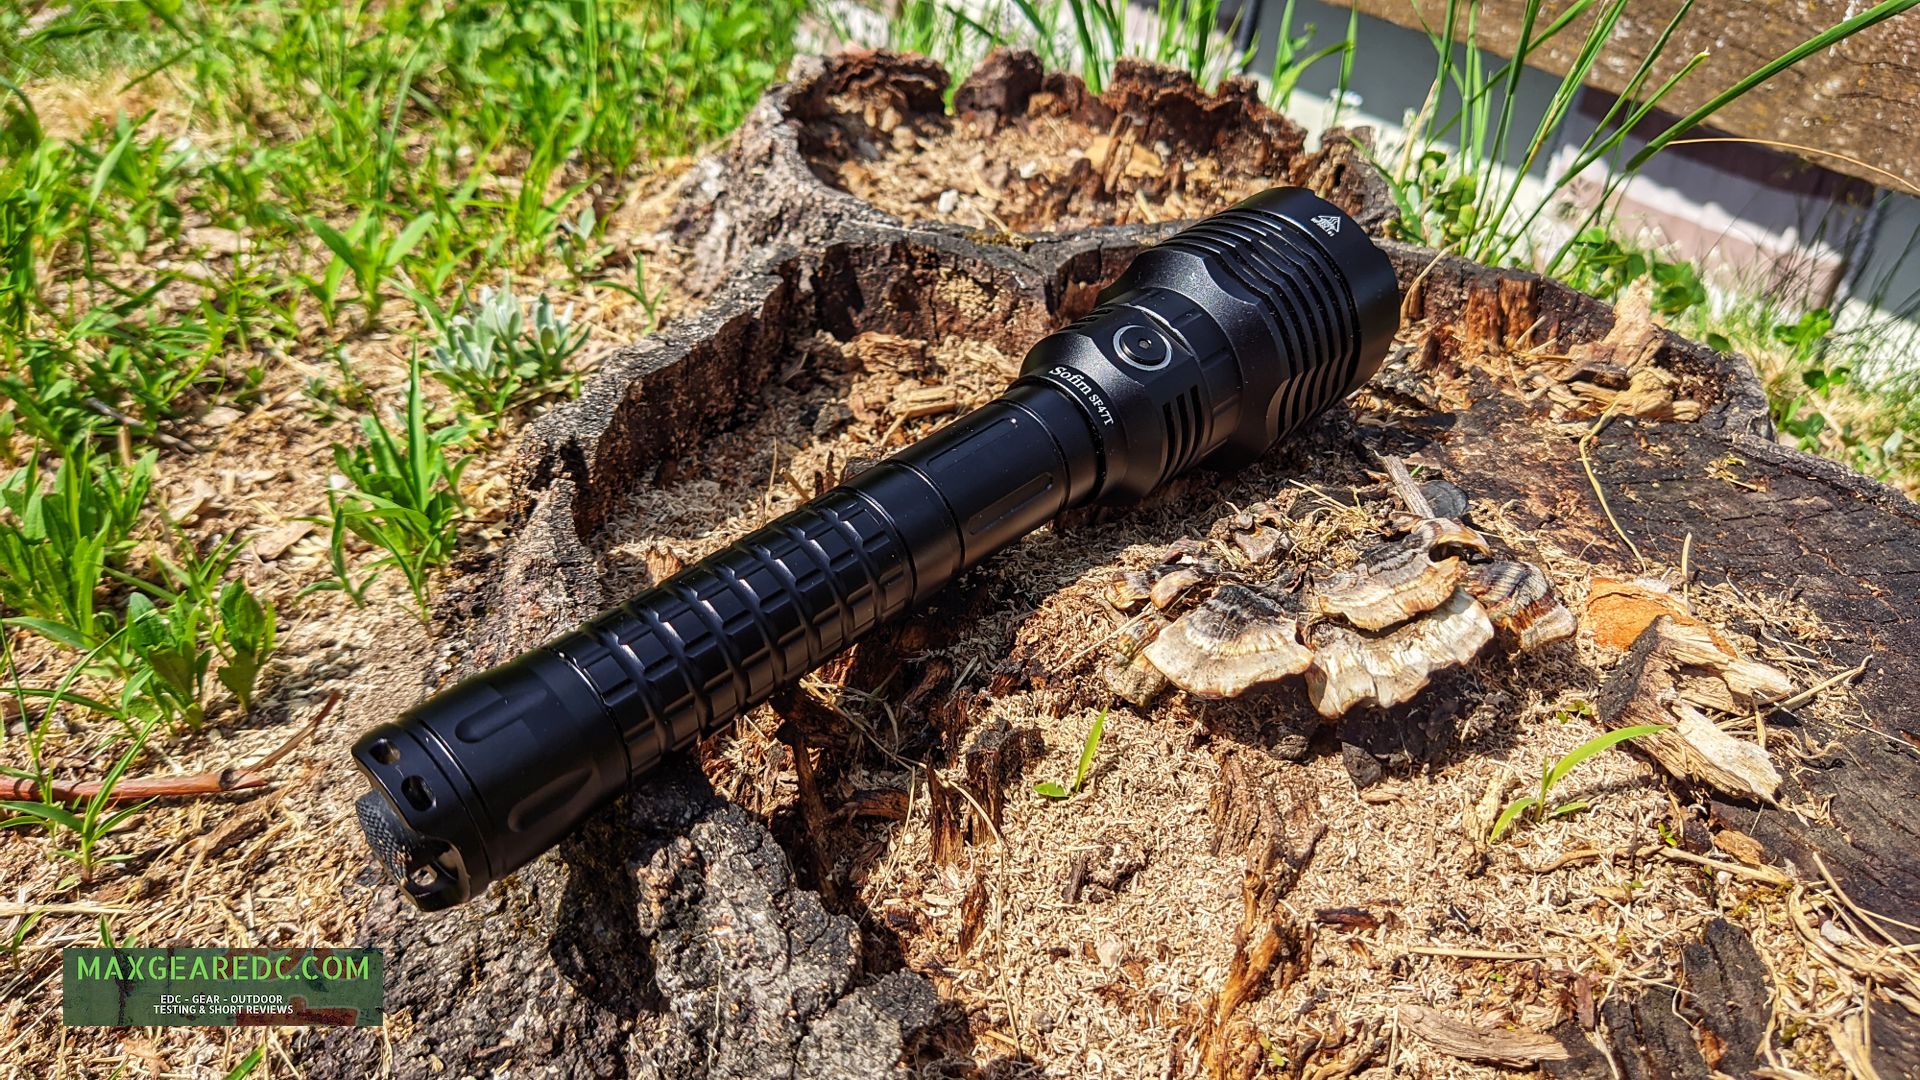 Sofirn_SF47W_flashlight_Review_21700_thrower_maxgearedc.com_EDC_GEAR_OUTDOOR_TESTING_and_SHORT_REVIEWS_8